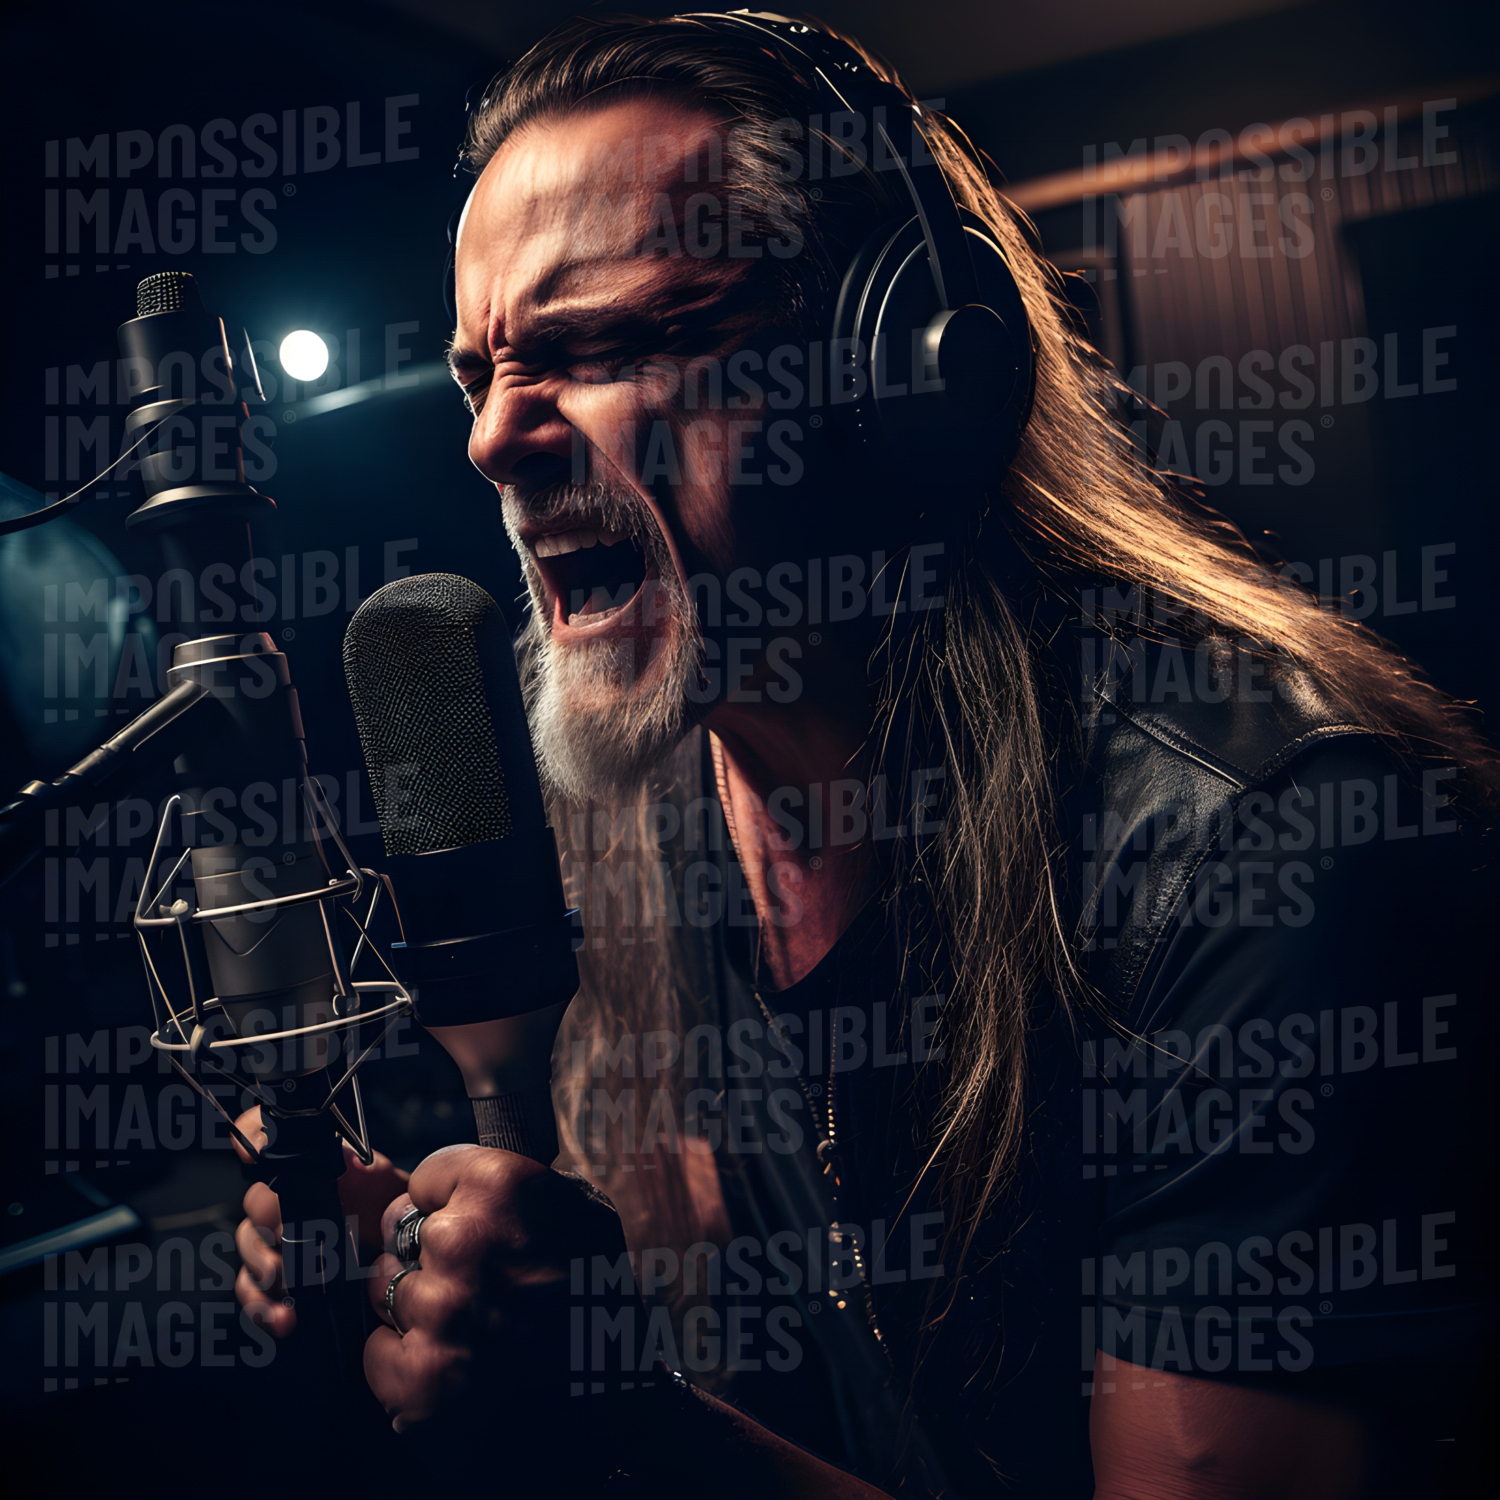 Bearded heavy metal singer performing emotionally in a recording studio -  Bearded heavy metal singer passionately performing in a recording studio, belting out powerful vocals and shredding on guitar.